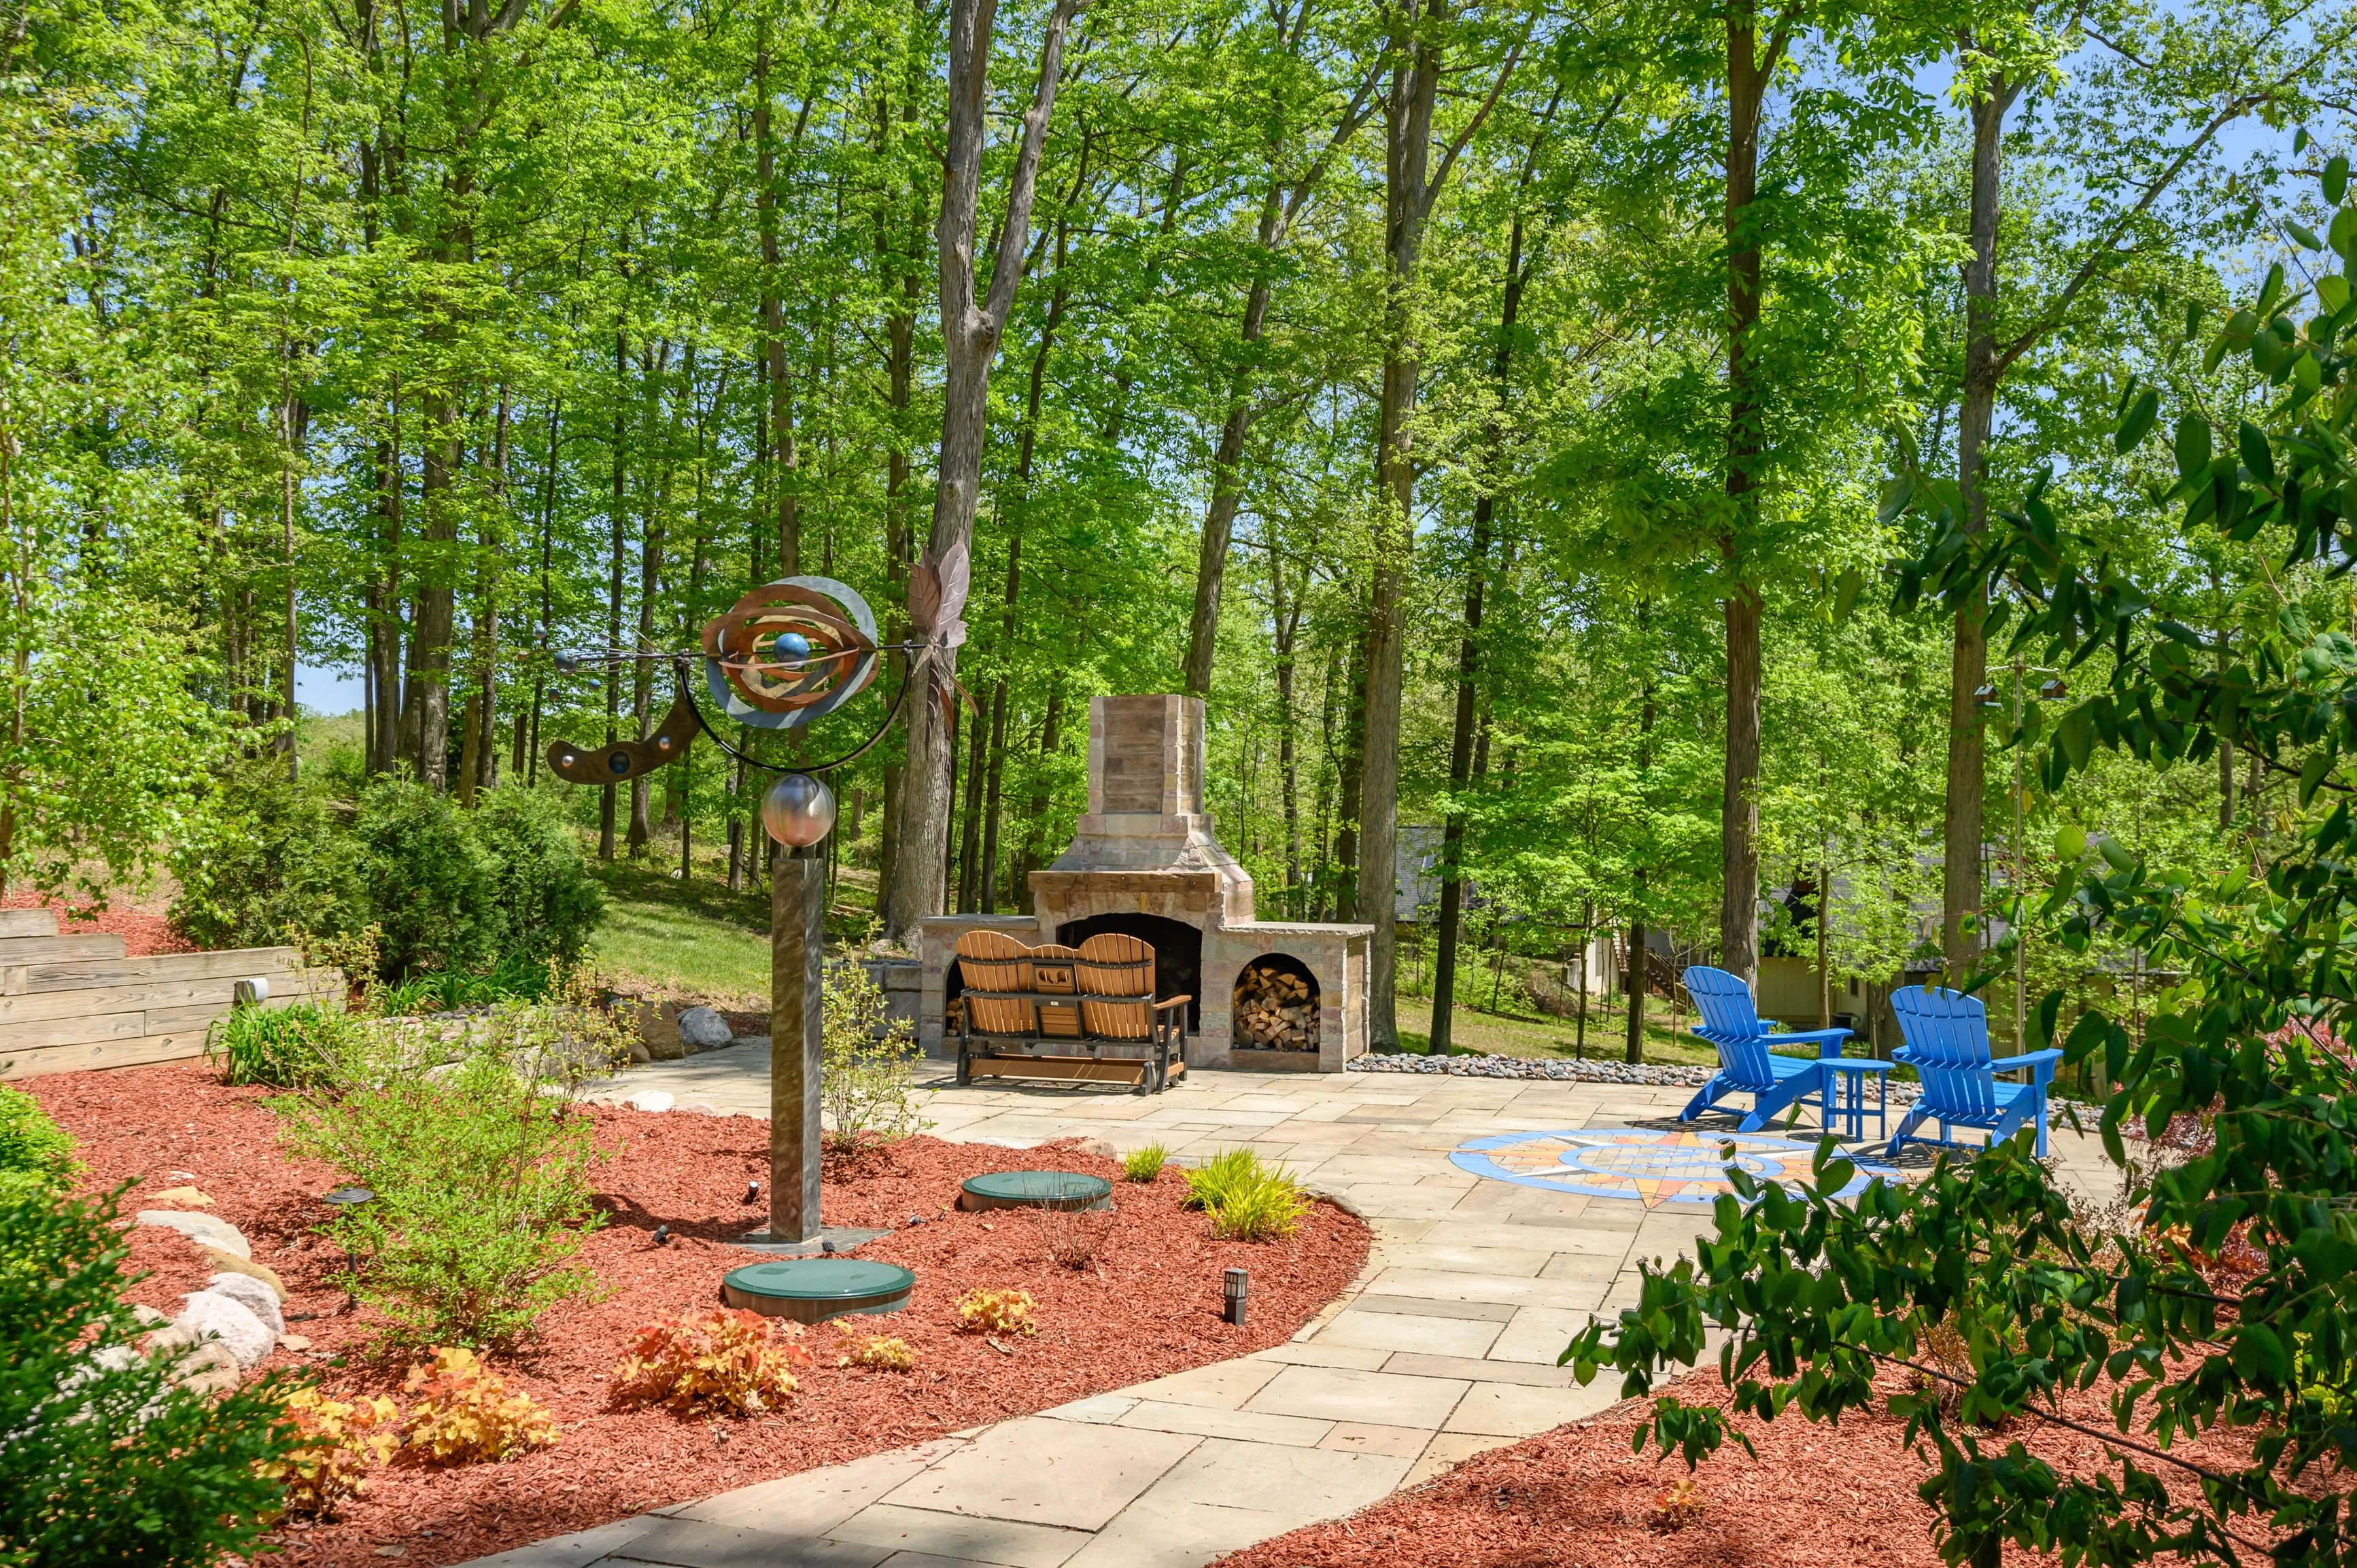 A serene backyard with lush trees, a stone footpath, a sculptural wind spinner, an outdoor fireplace, and two blue Adirondack chairs.